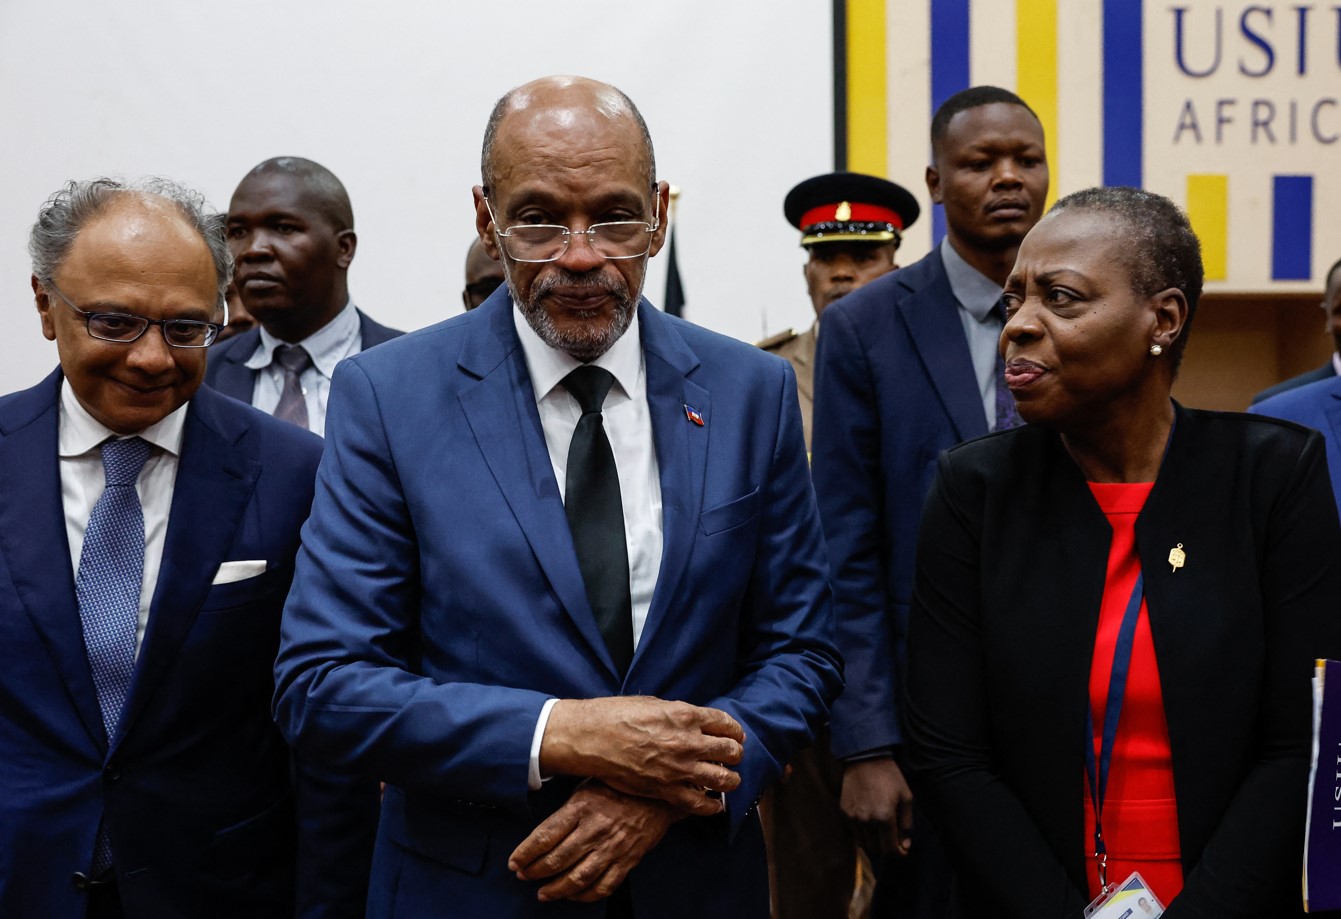 Outgoing Haiti PM Ariel Henry welcome to stay in US: official